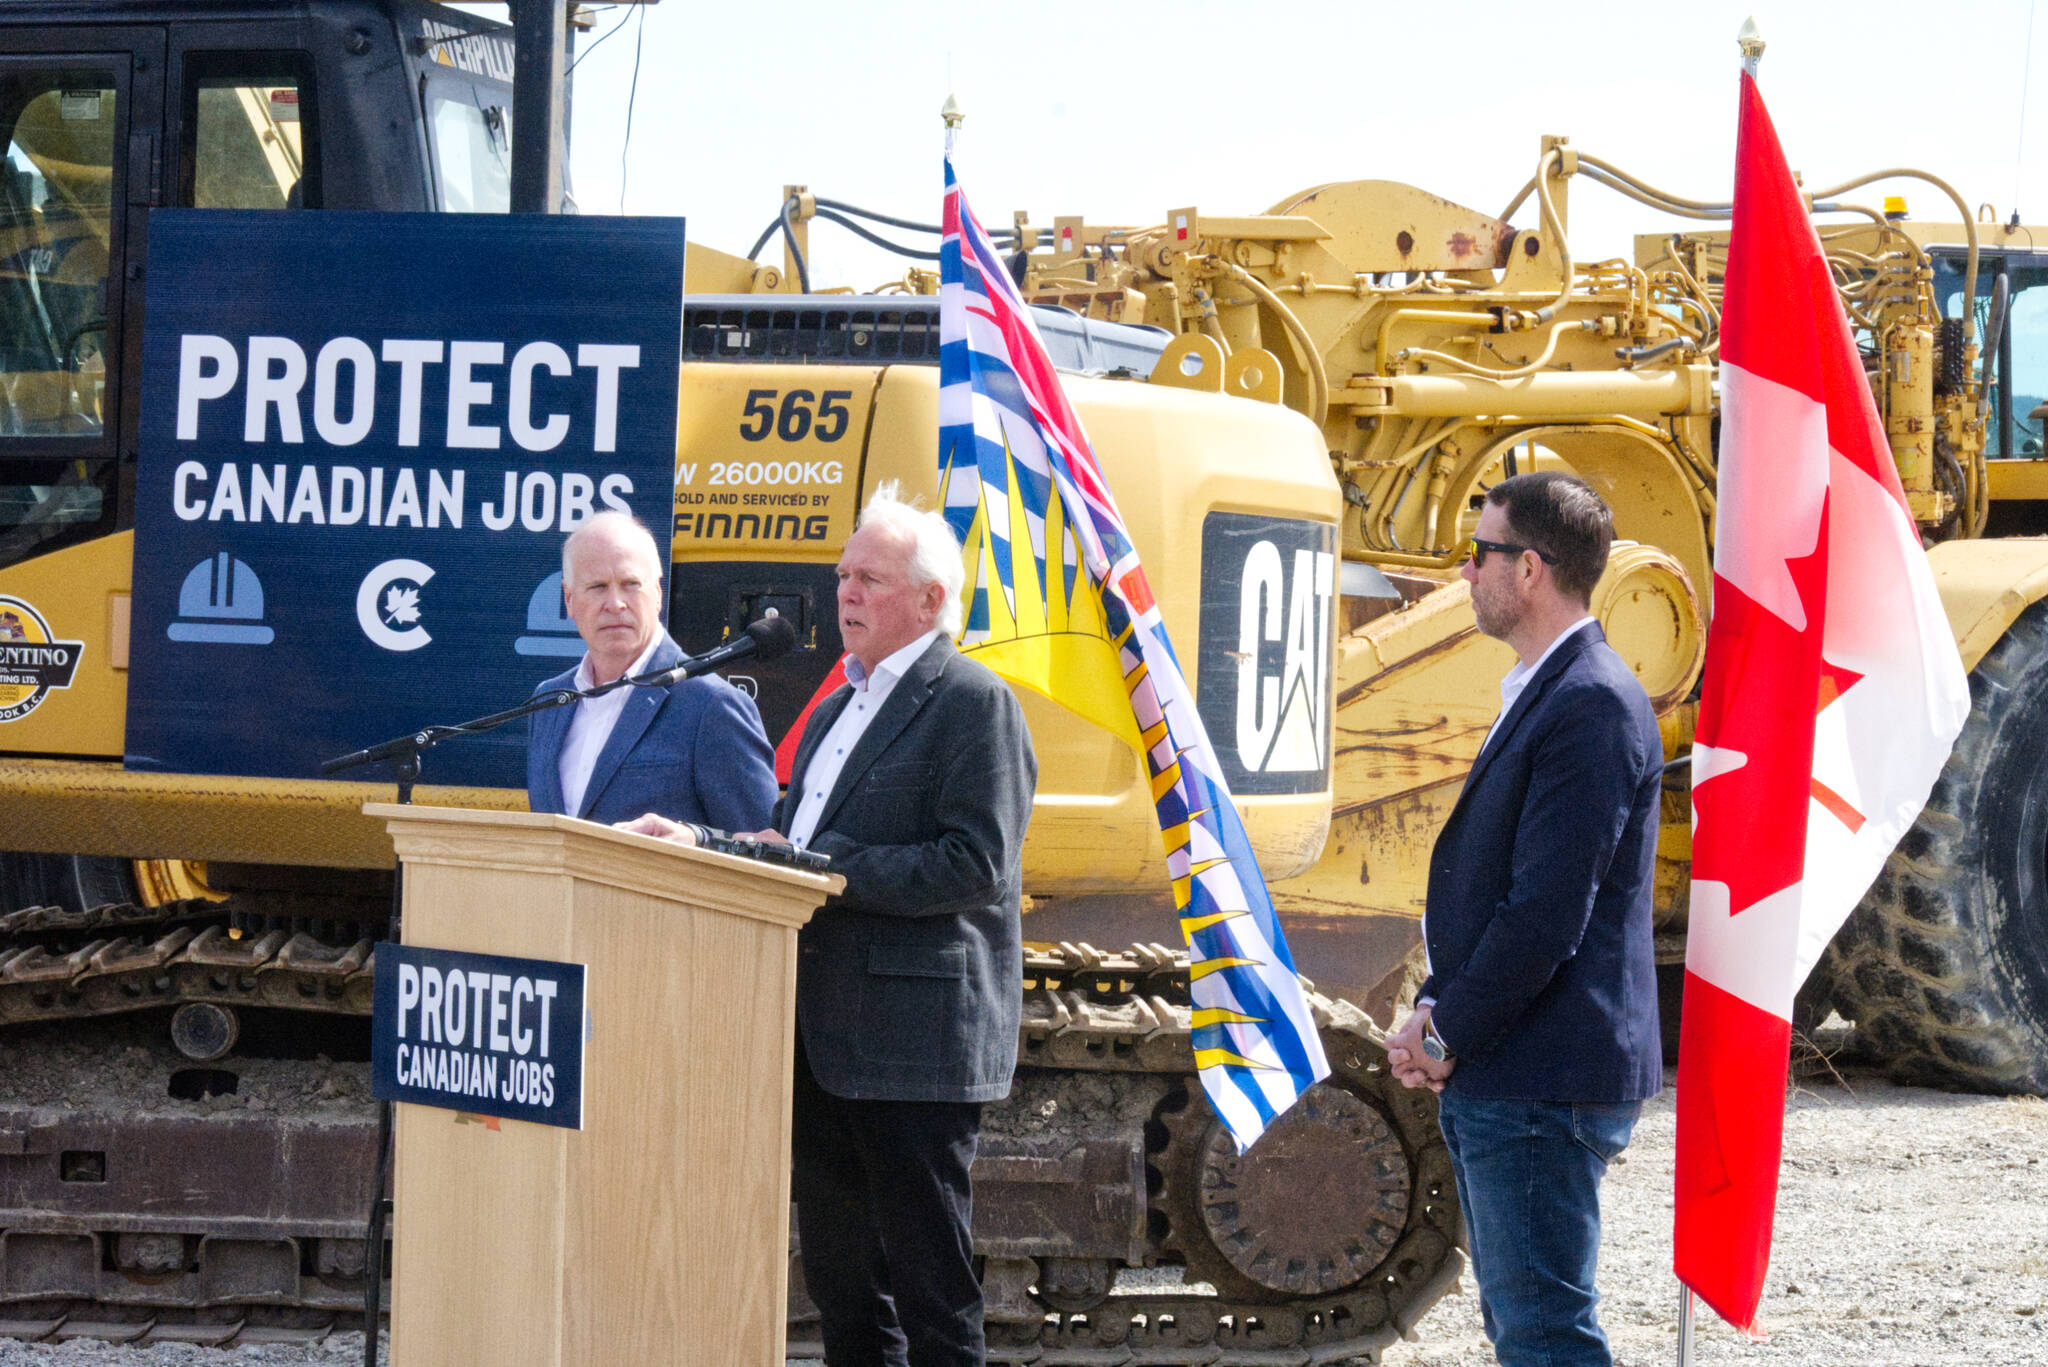 Kootenay-Columbia MP Rob Morrison speaks at the podium, flanked by South Shore—St. Margarets MP Rick Perkins and Foothills MP John Barlow during an announcement in Cranbrook on Thursday, April 27. Trevor Crawley photo.